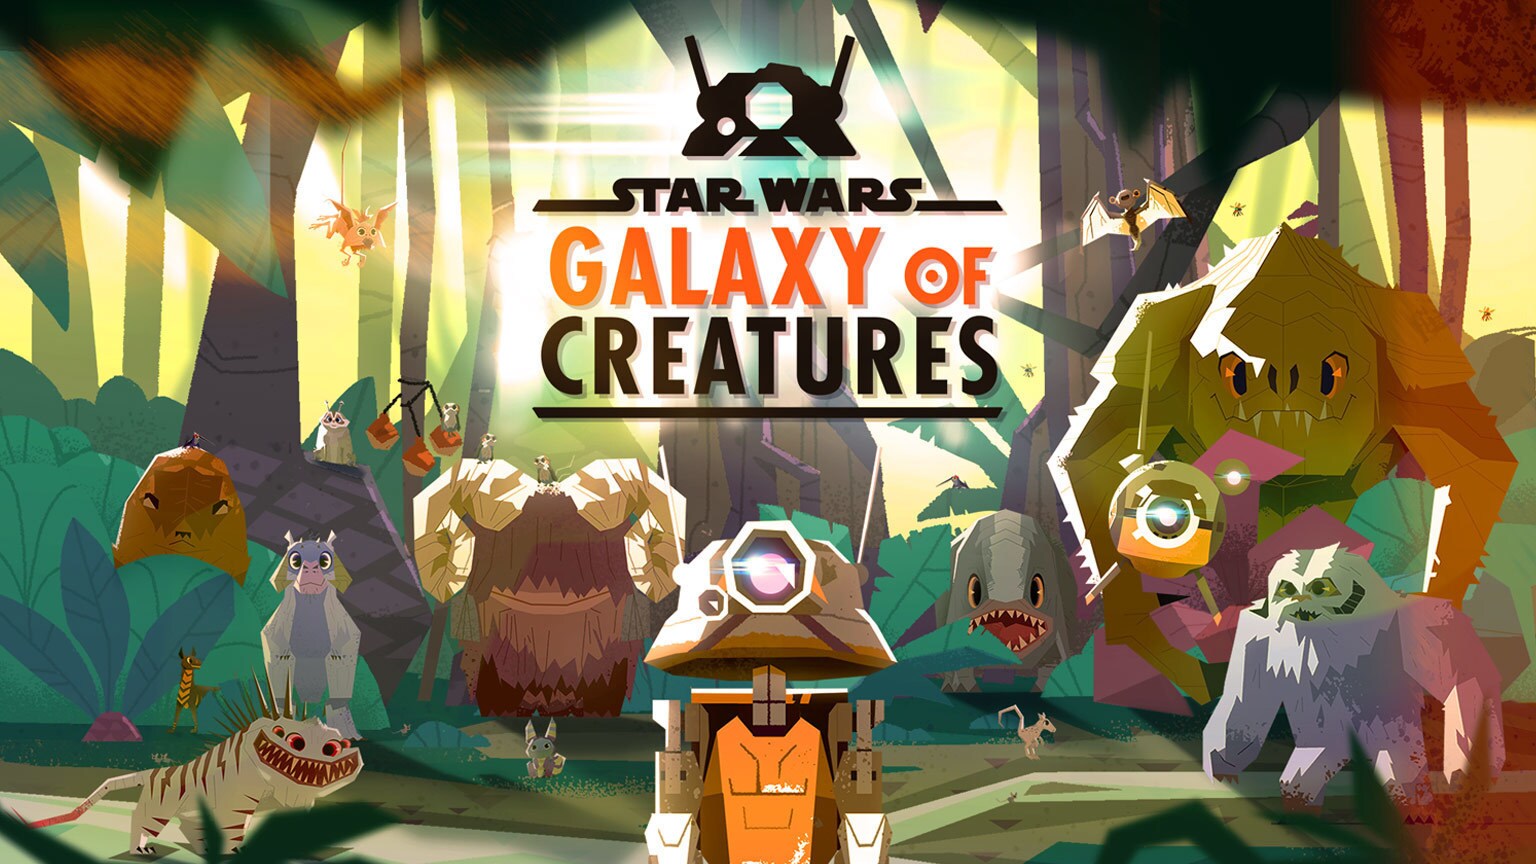 Meet Galactic Wildlife Big and Small in Star Wars Galaxy of Creatures